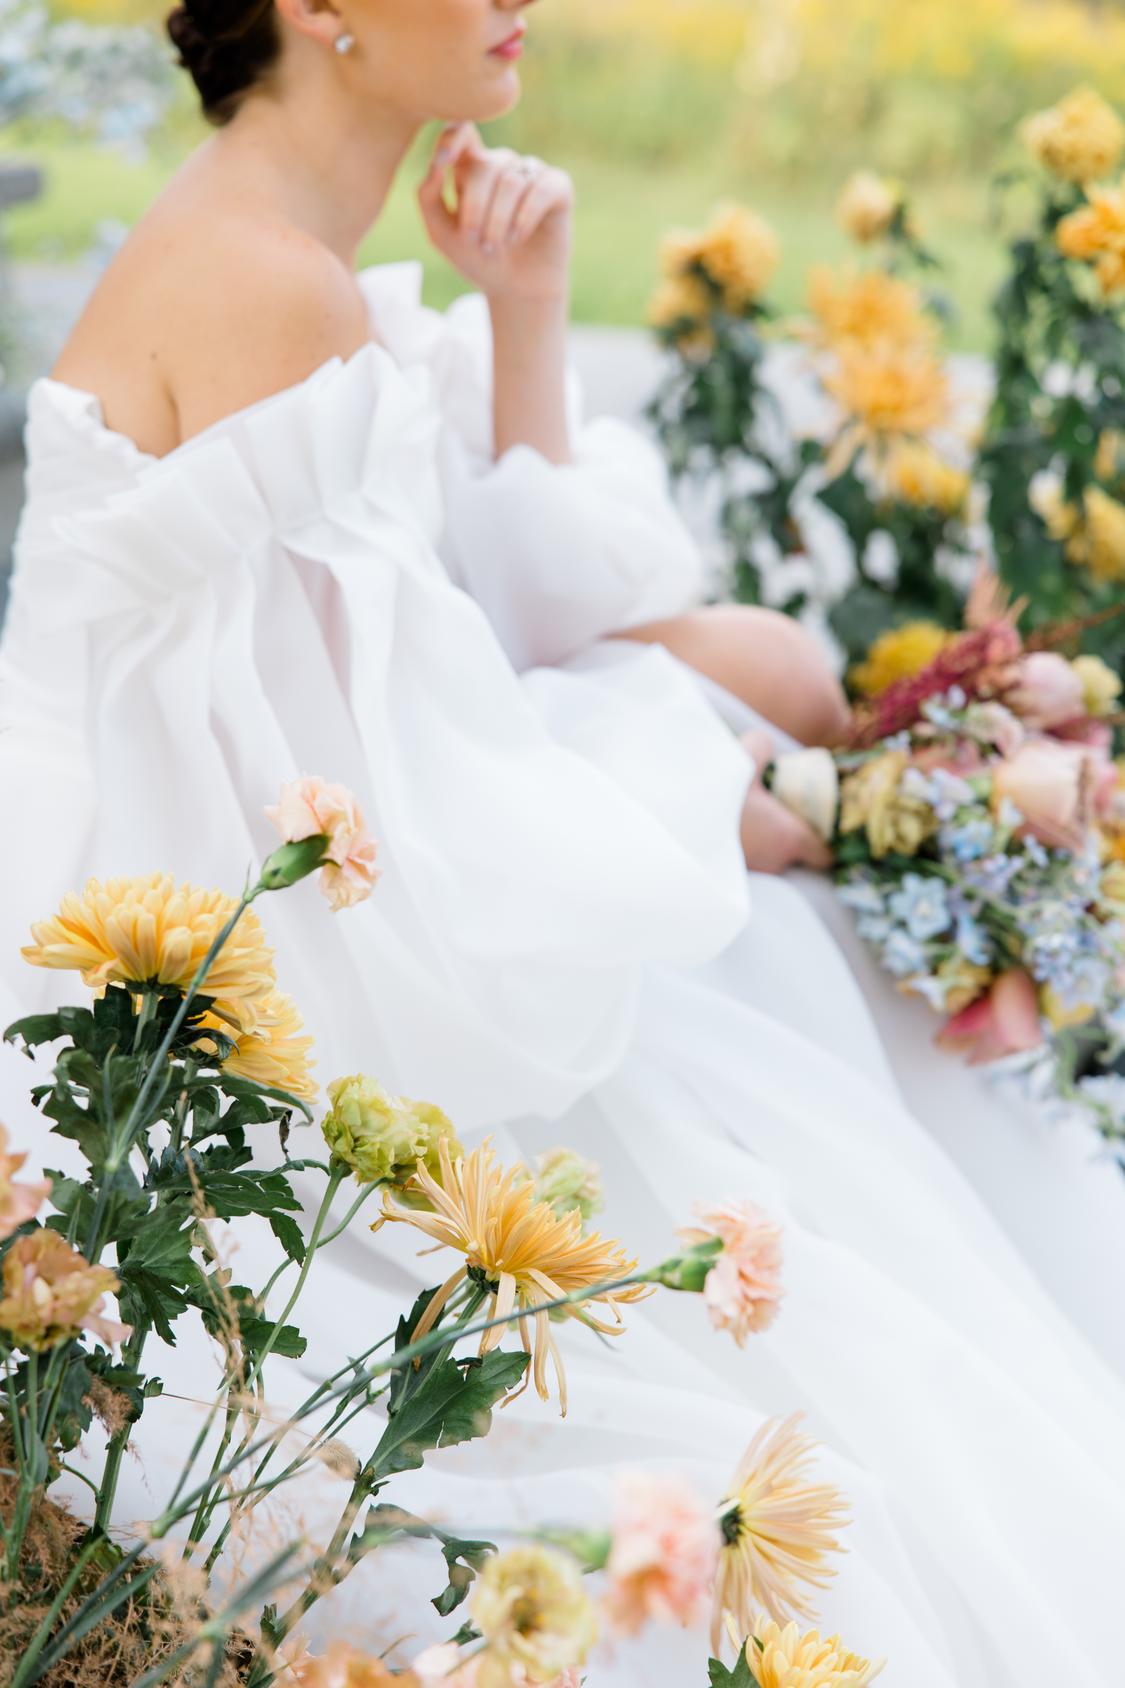 Soft-Sophisticated Wedding Inspiration in Michigan Full of Fall Colors